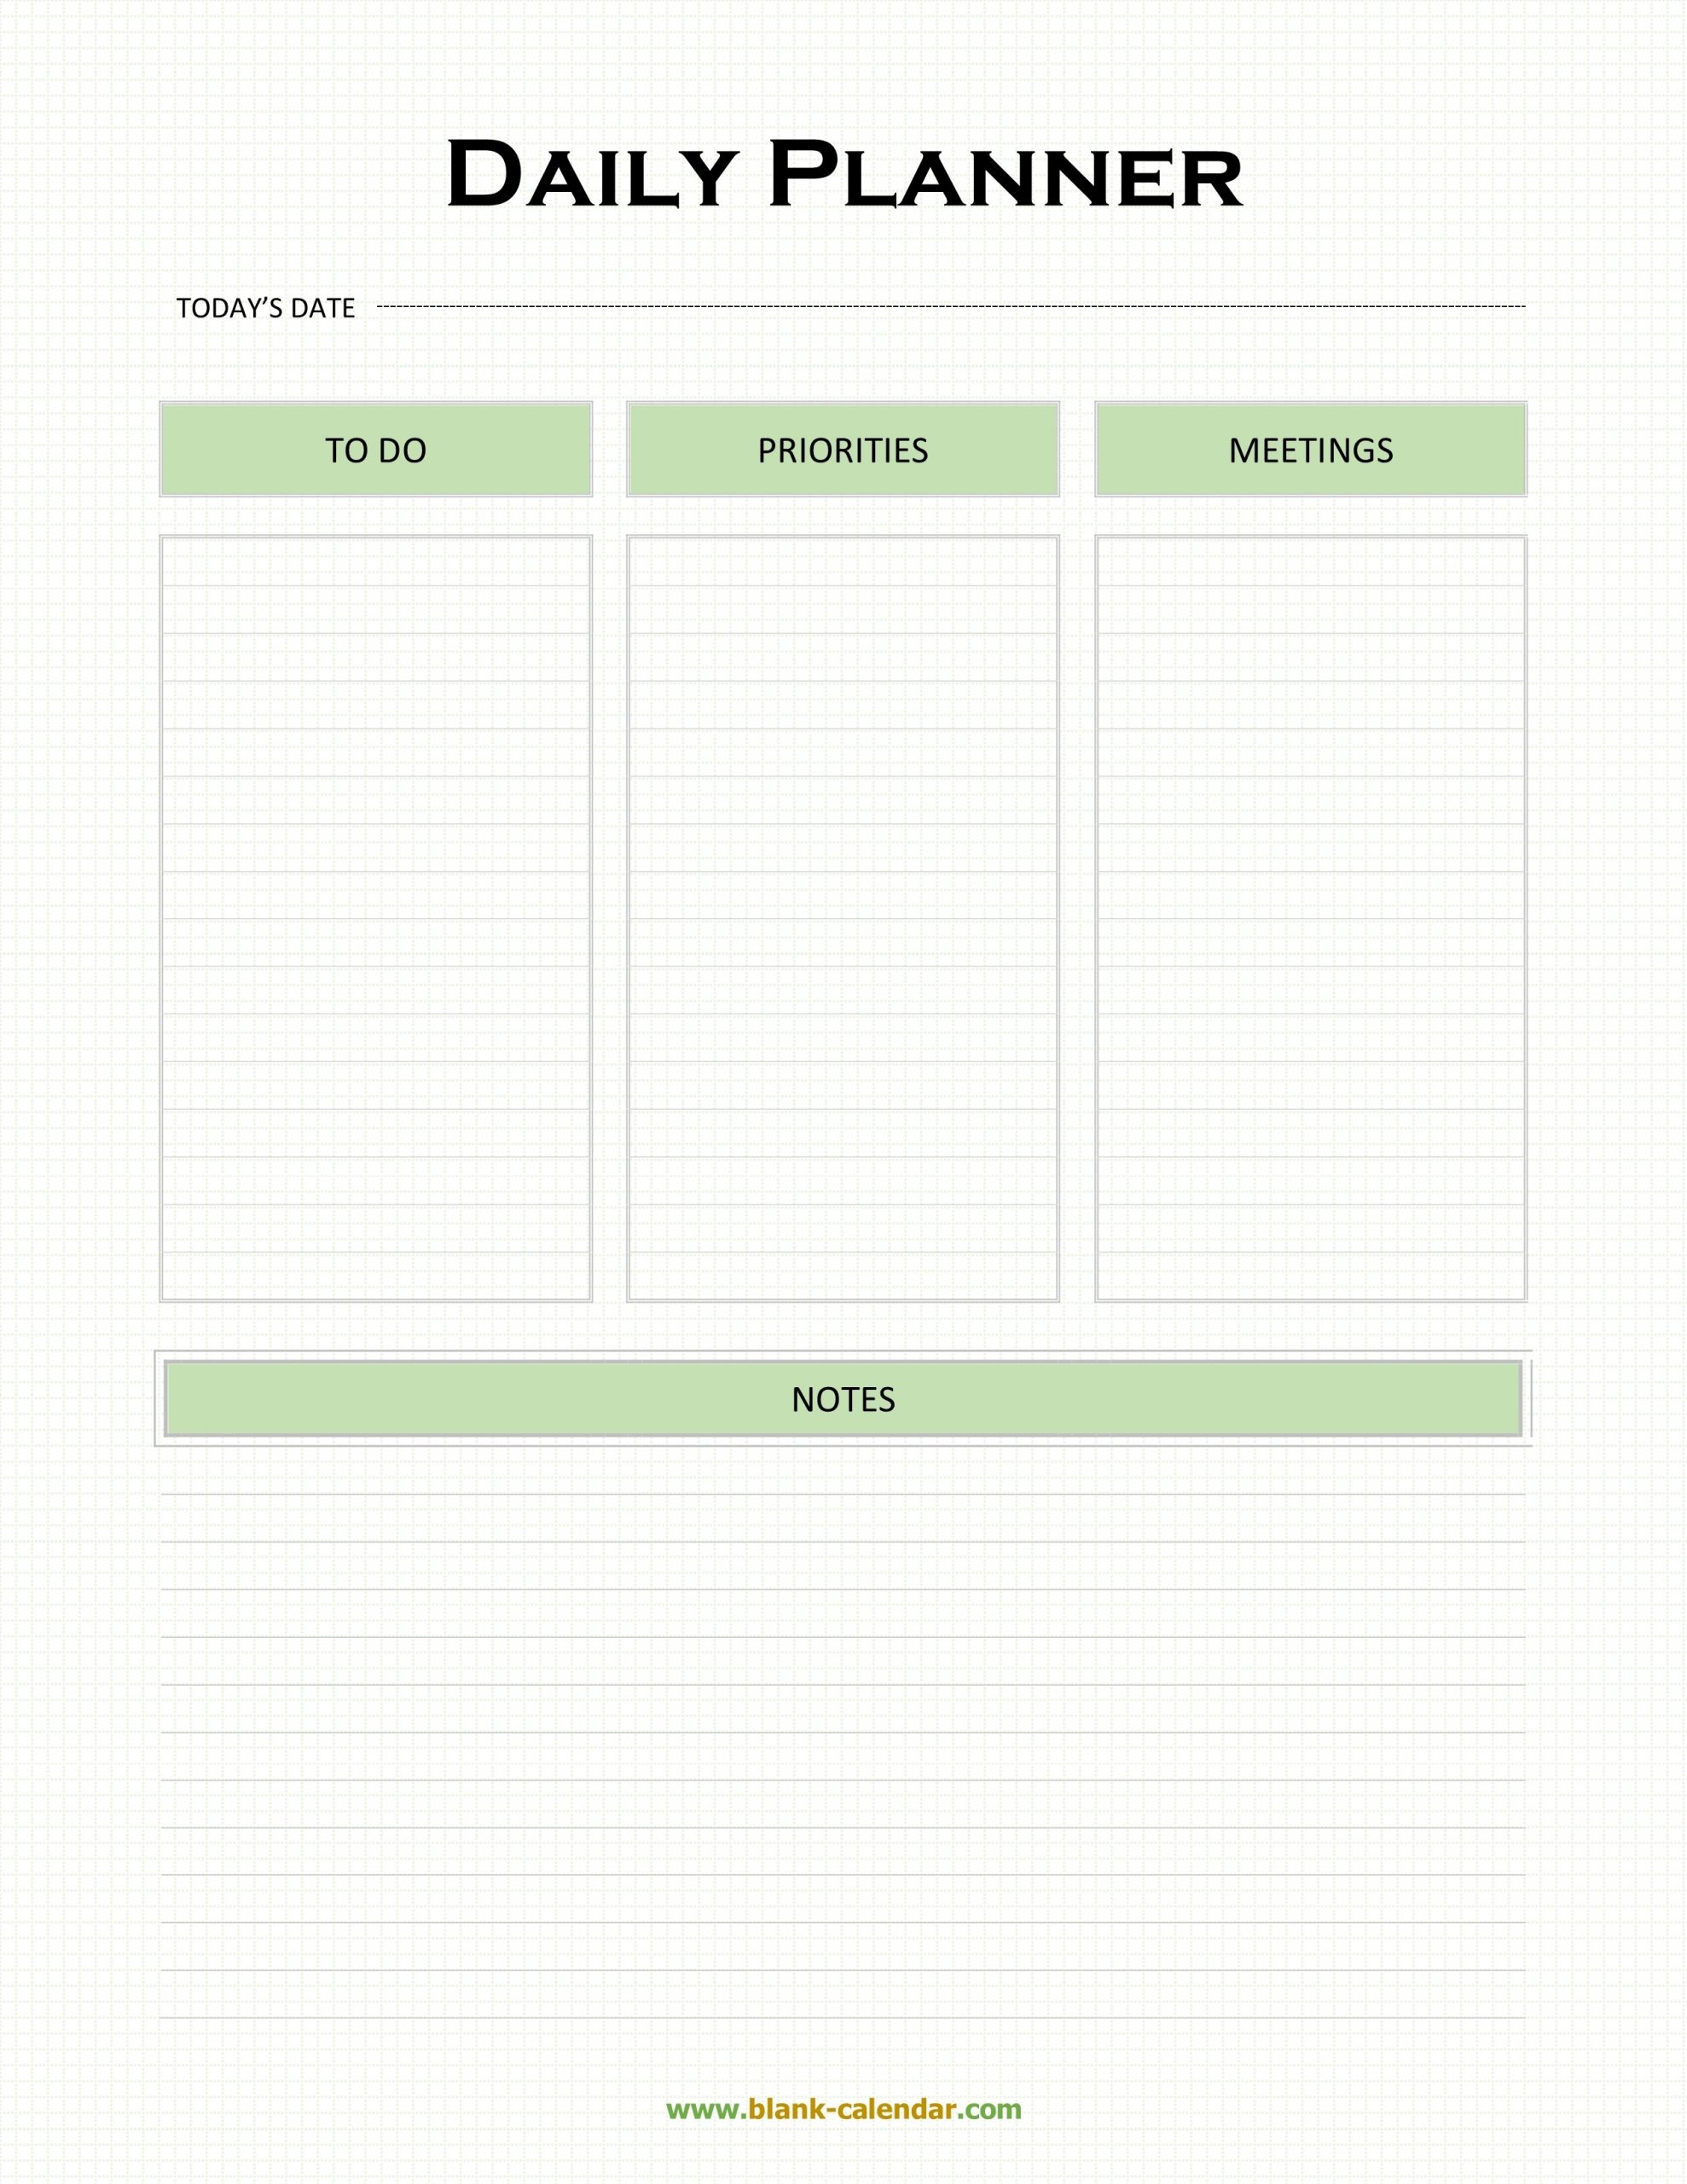 Daily Planner Templates (Word, Excel, Pdf)  Blank Dialy Planner